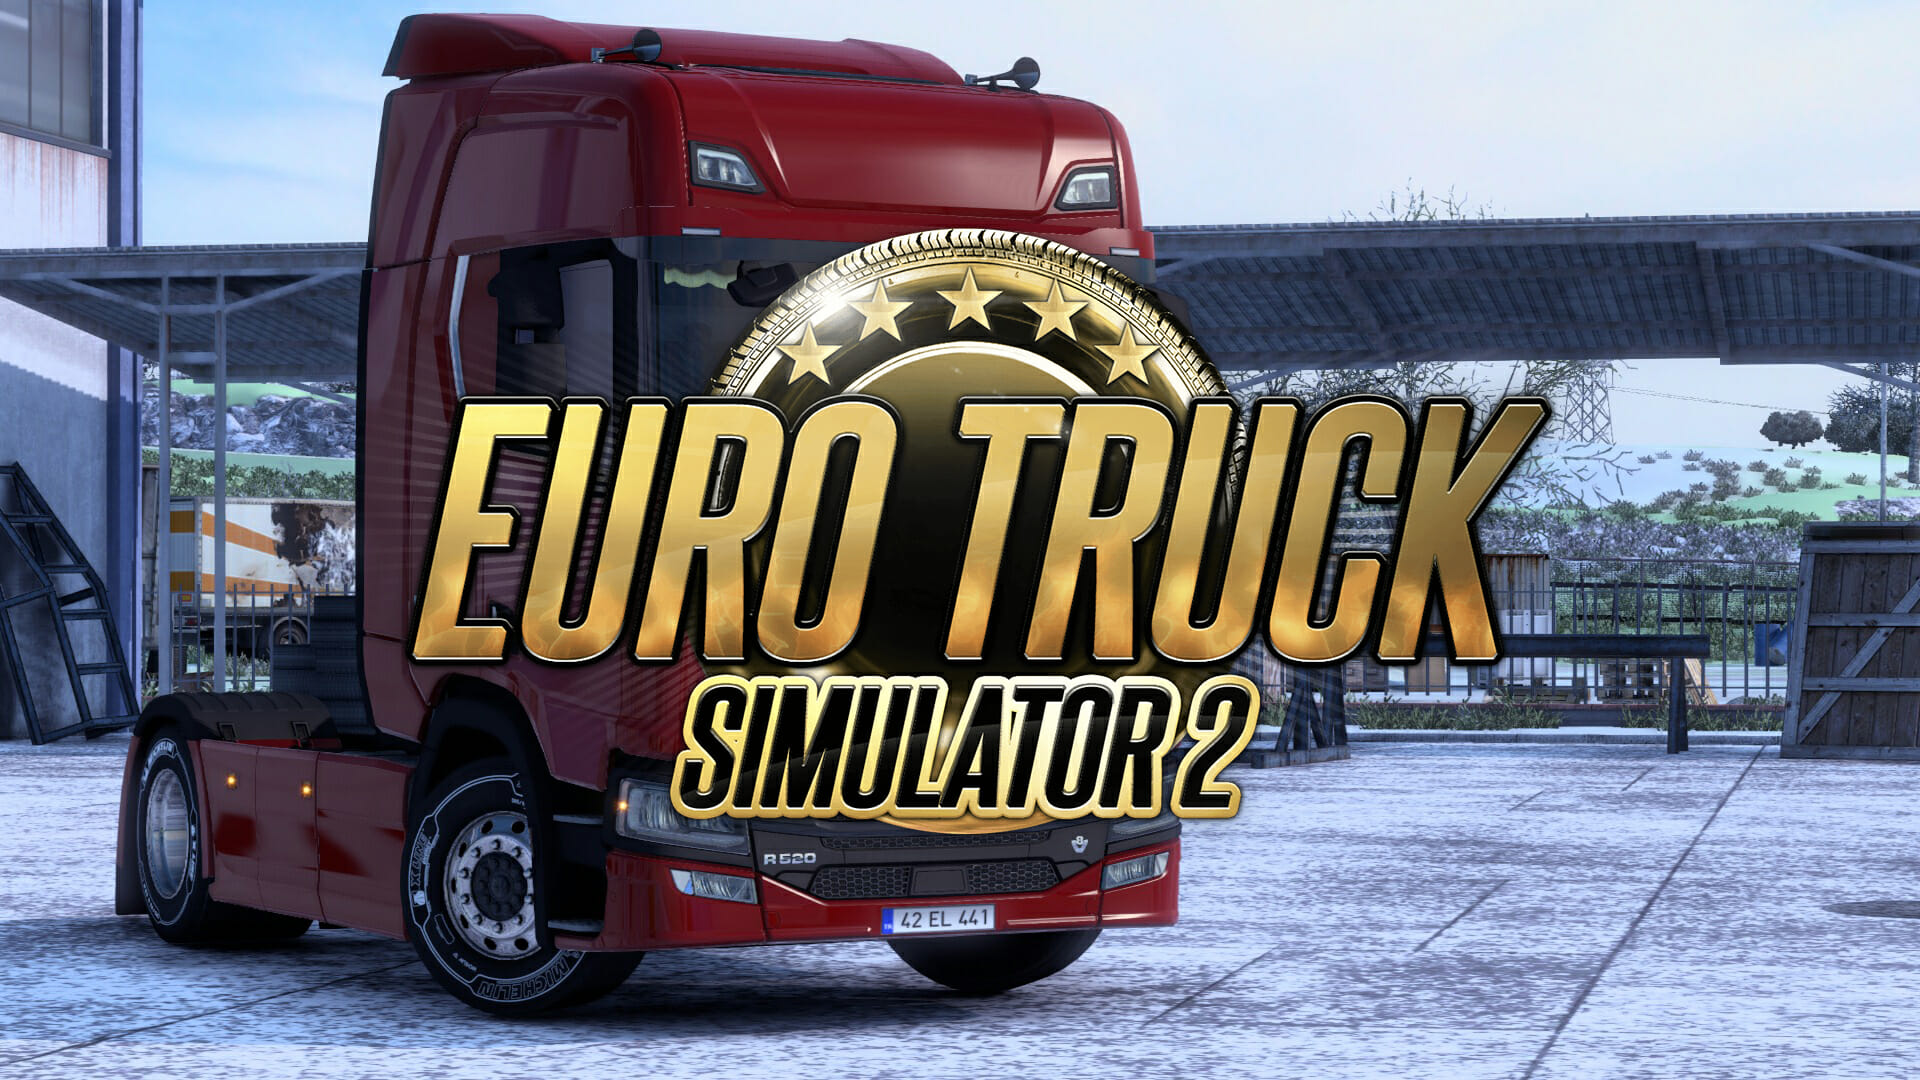 Make your childhood dream come true, become a driver with Euro Truck Simulator 2